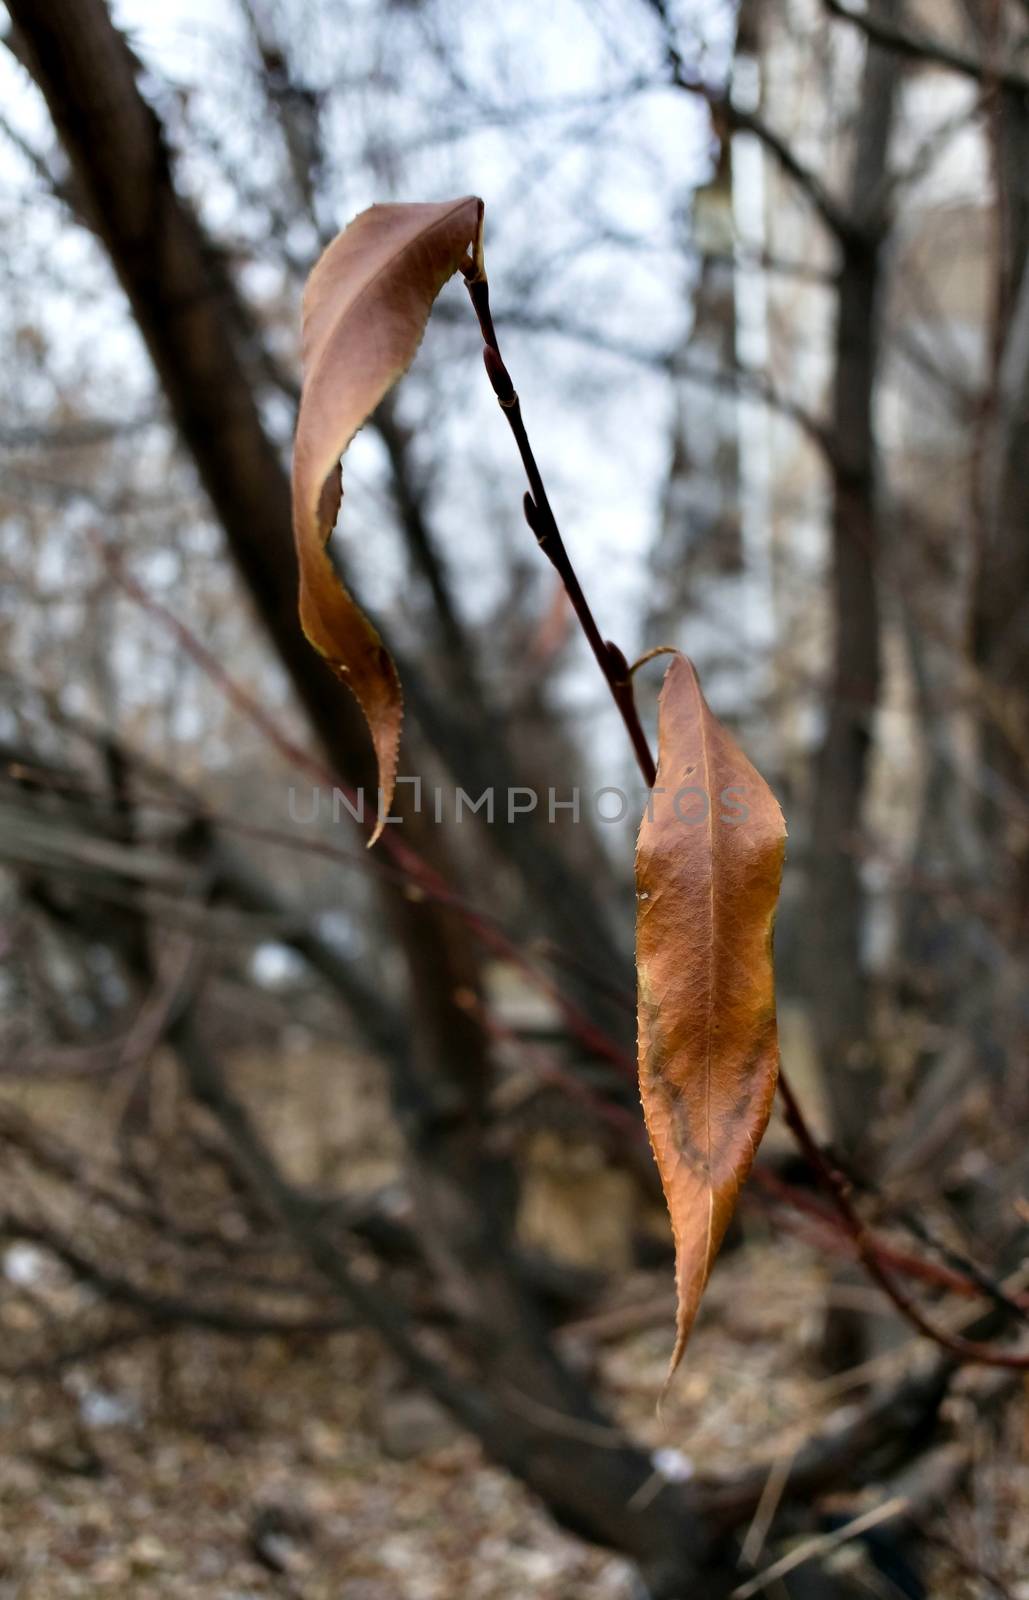 dry leaves on the branch in late autumn by valerypetr